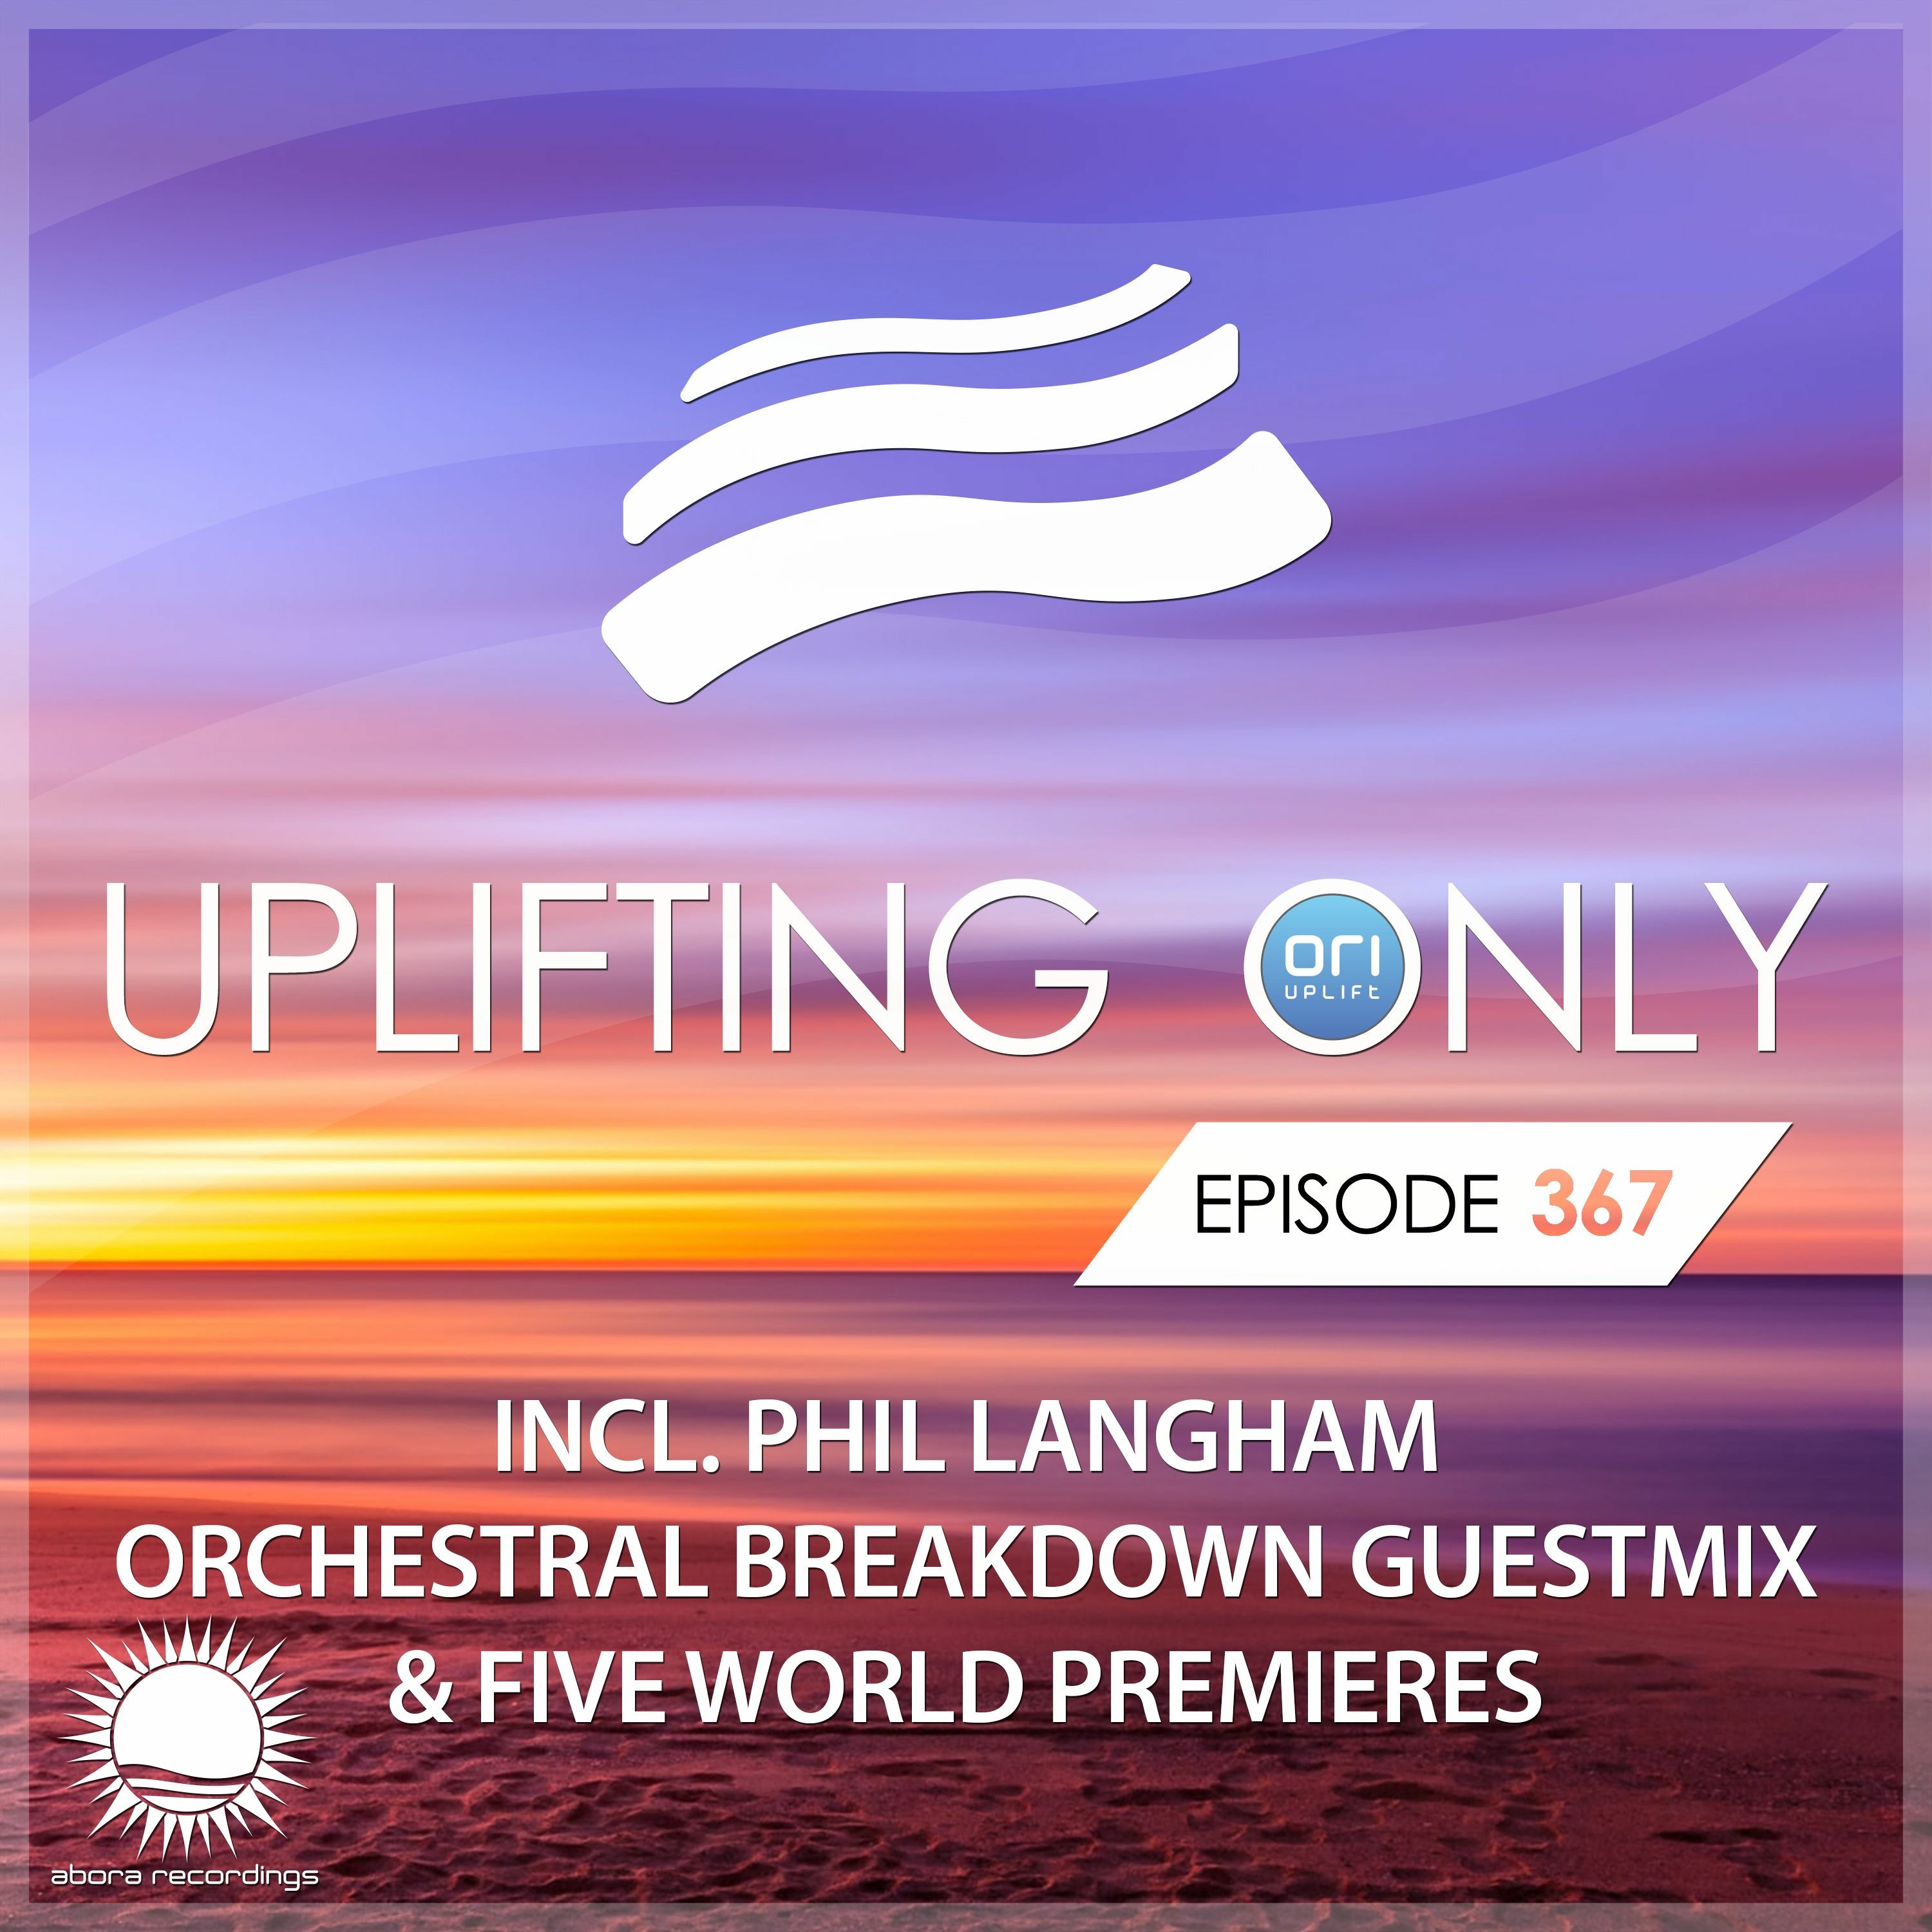 Uplifting Only 367 (Feb 20, 2020) (incl. Phil Langham Orchestral Breakdown Special Guestmix)